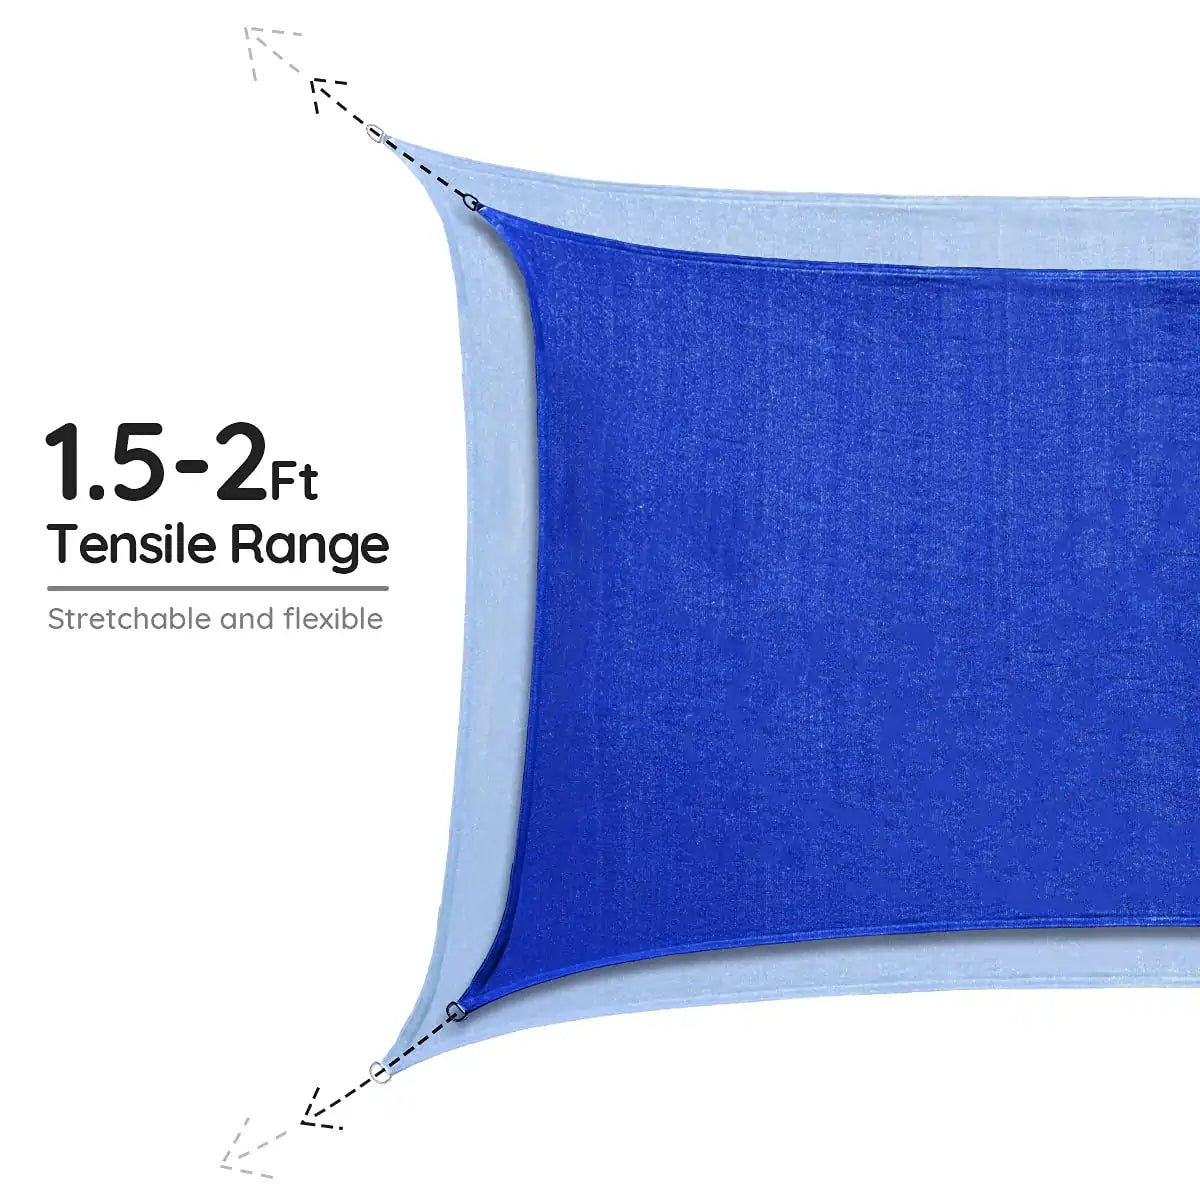 blue rectangular sunshade are stretch able